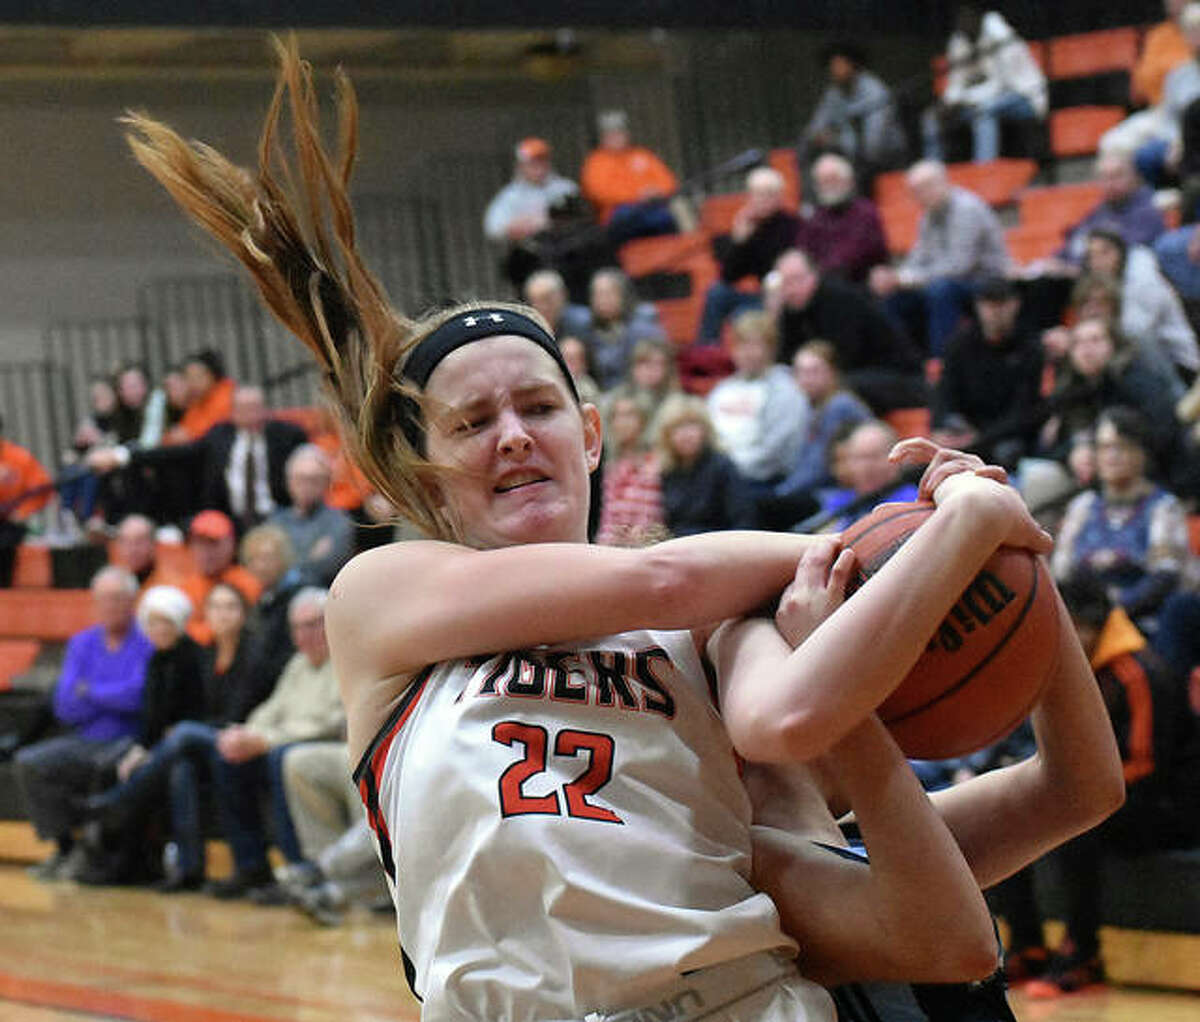 Edwardsville center Katelynne Roberts fights for a rebound with a Belleville East player during the first quarter Tuesday in Belleville.